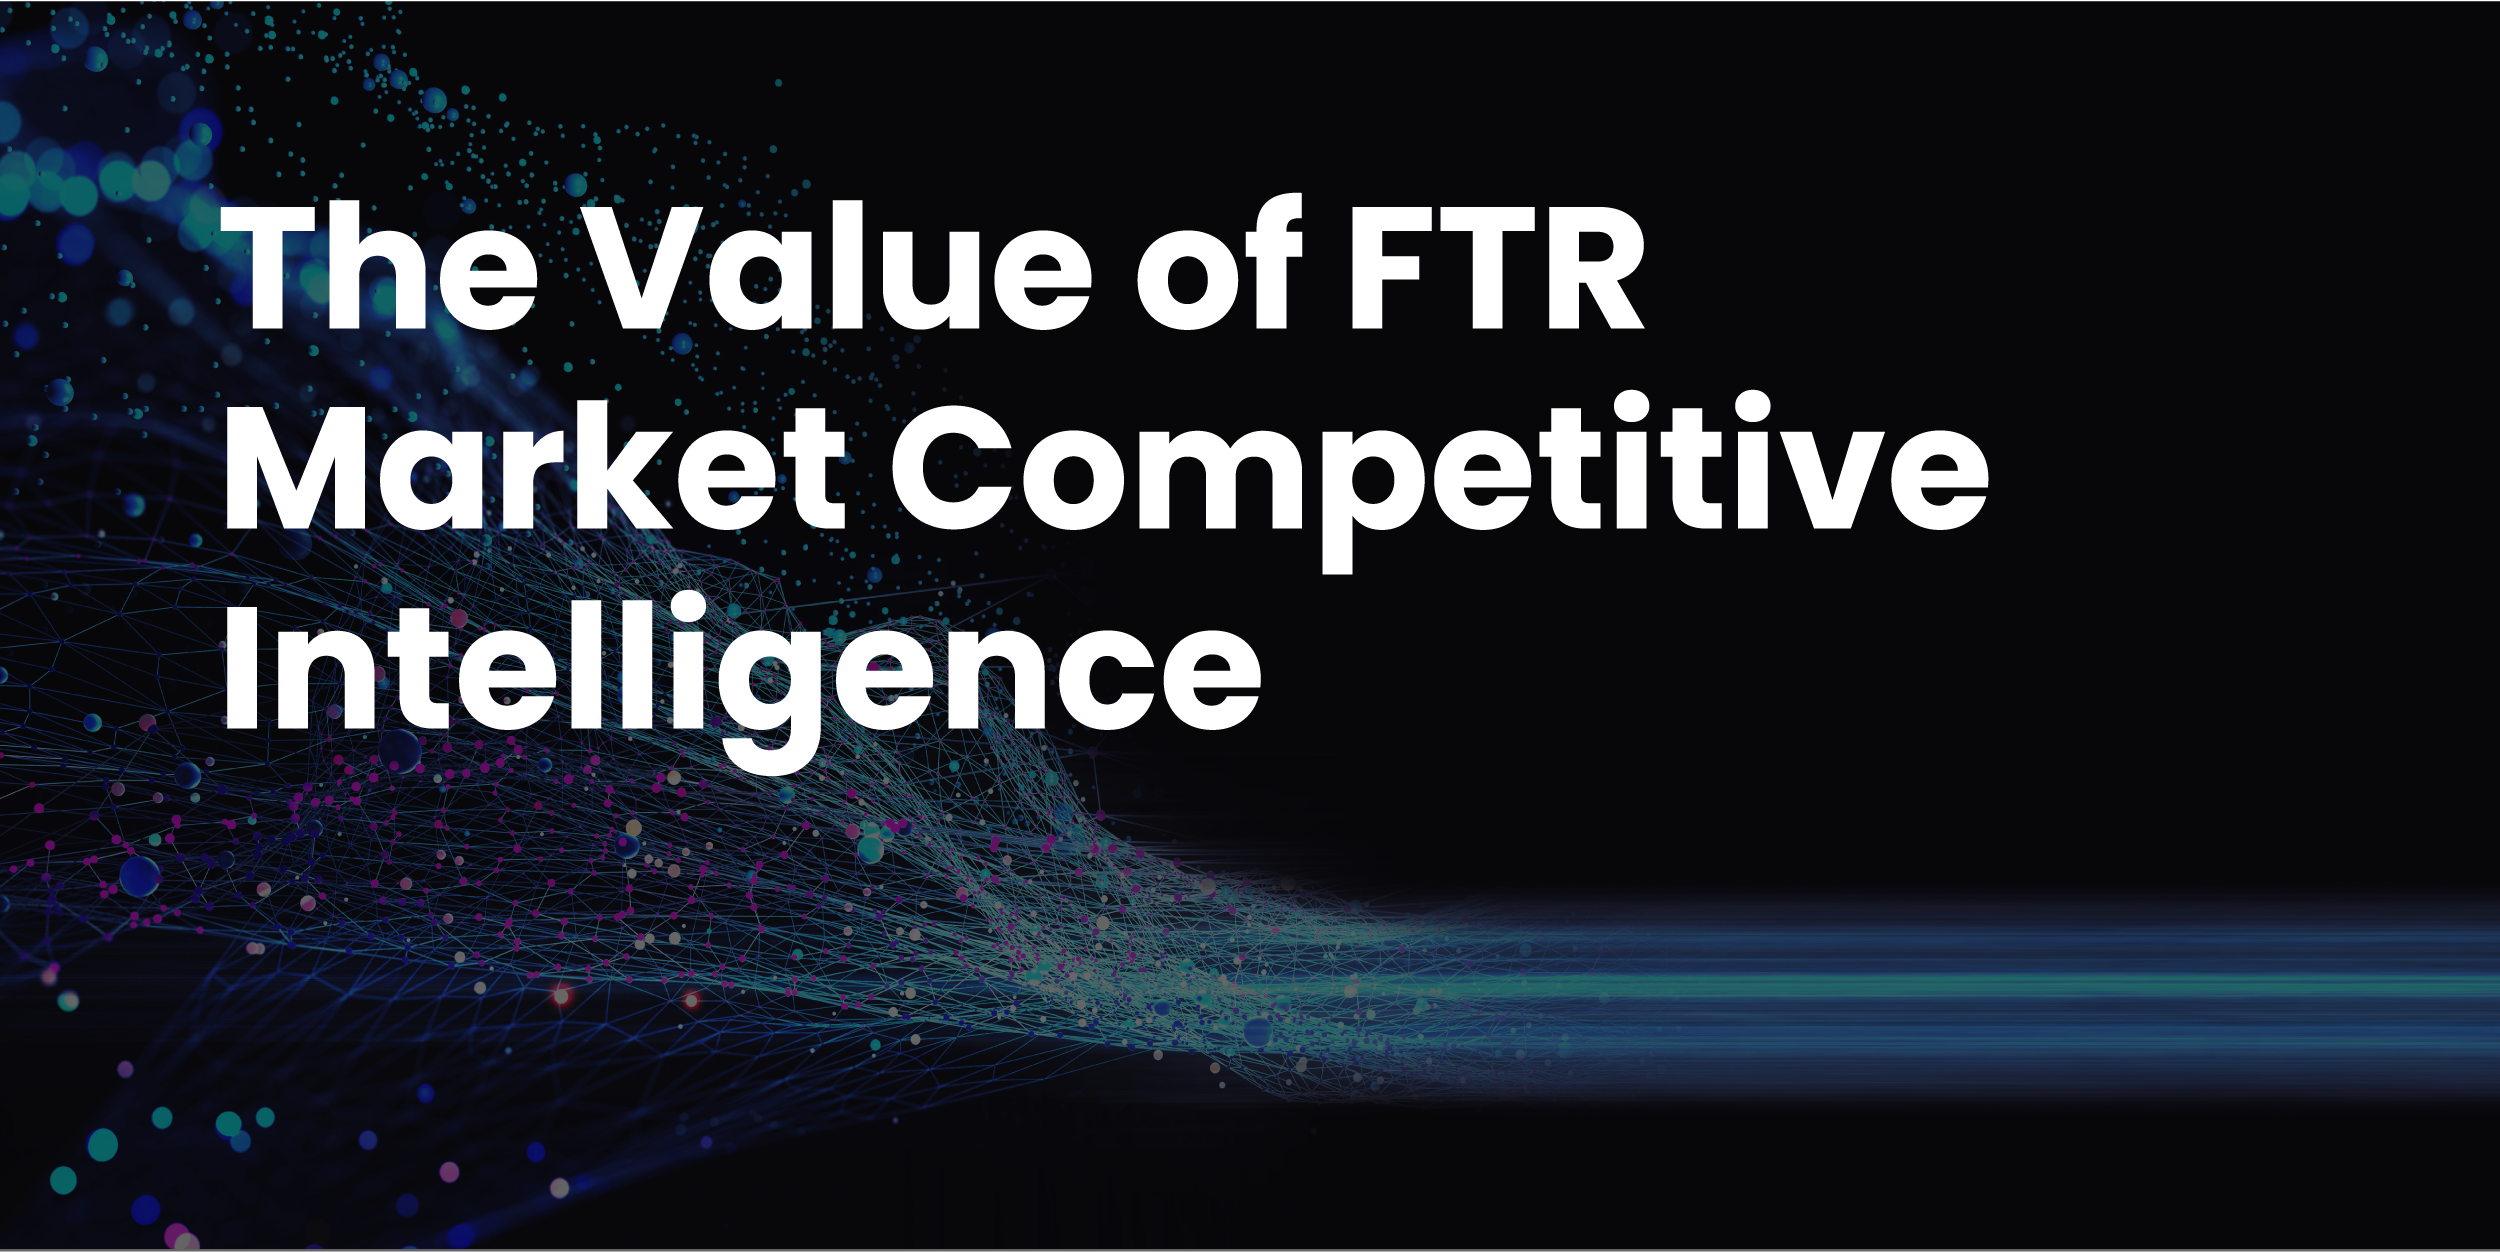 The value of FTR market competitive intelligence